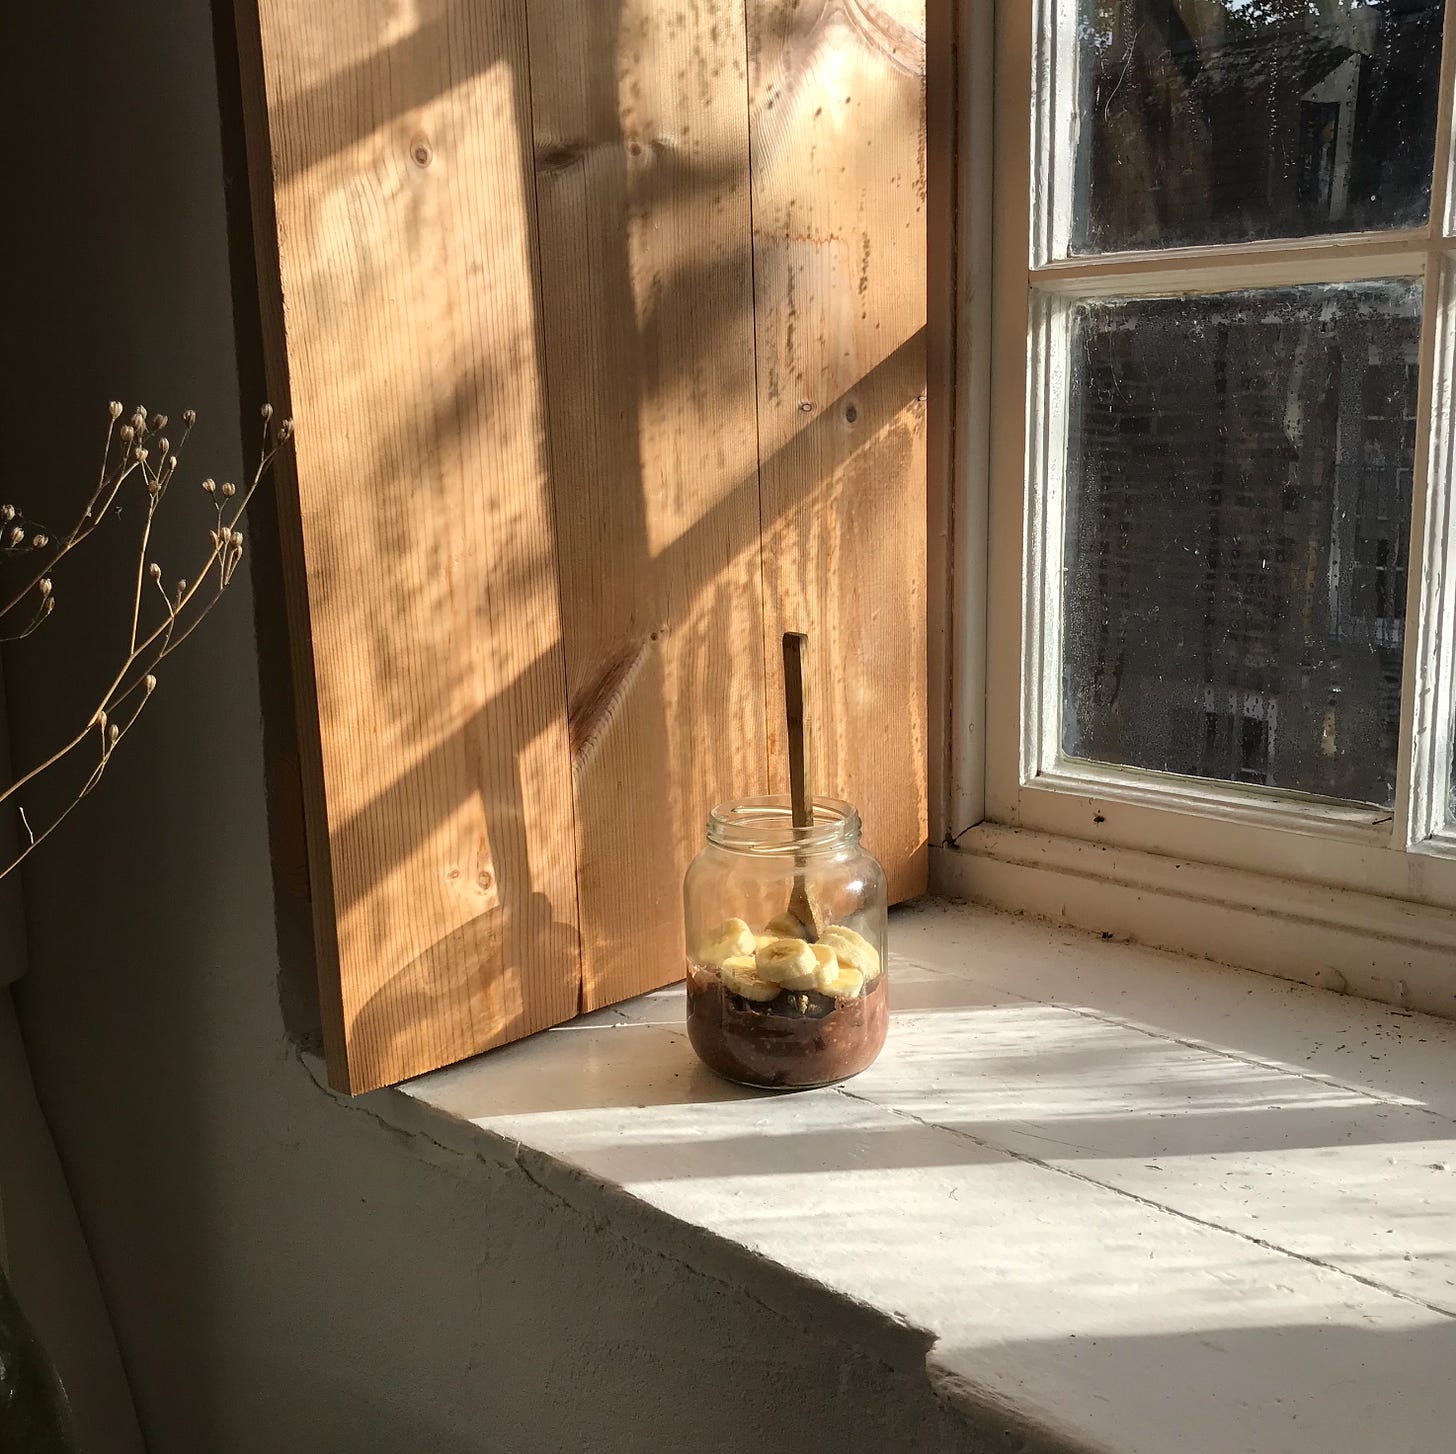 A window ledge in harsh bright morning light, with honey warm wood on the side panels. On the ledge is a clear glass jar half filled with something chocolatey, topped with banana slices. A wooden spoon stands straight upright in it. 